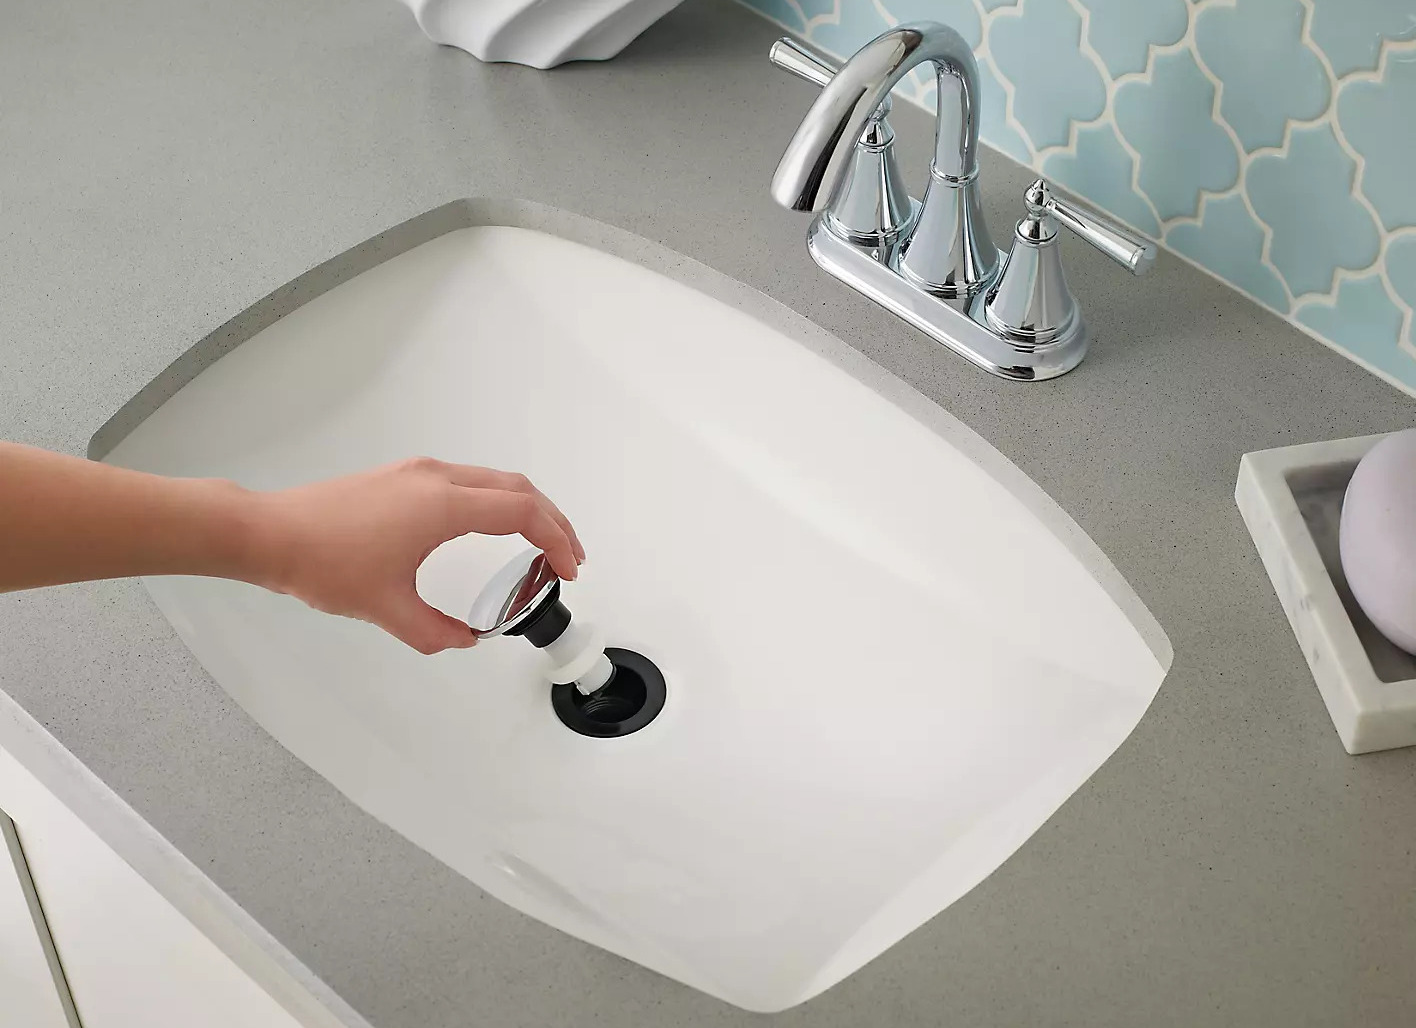 How To Remove Sink Stopper In Bathroom